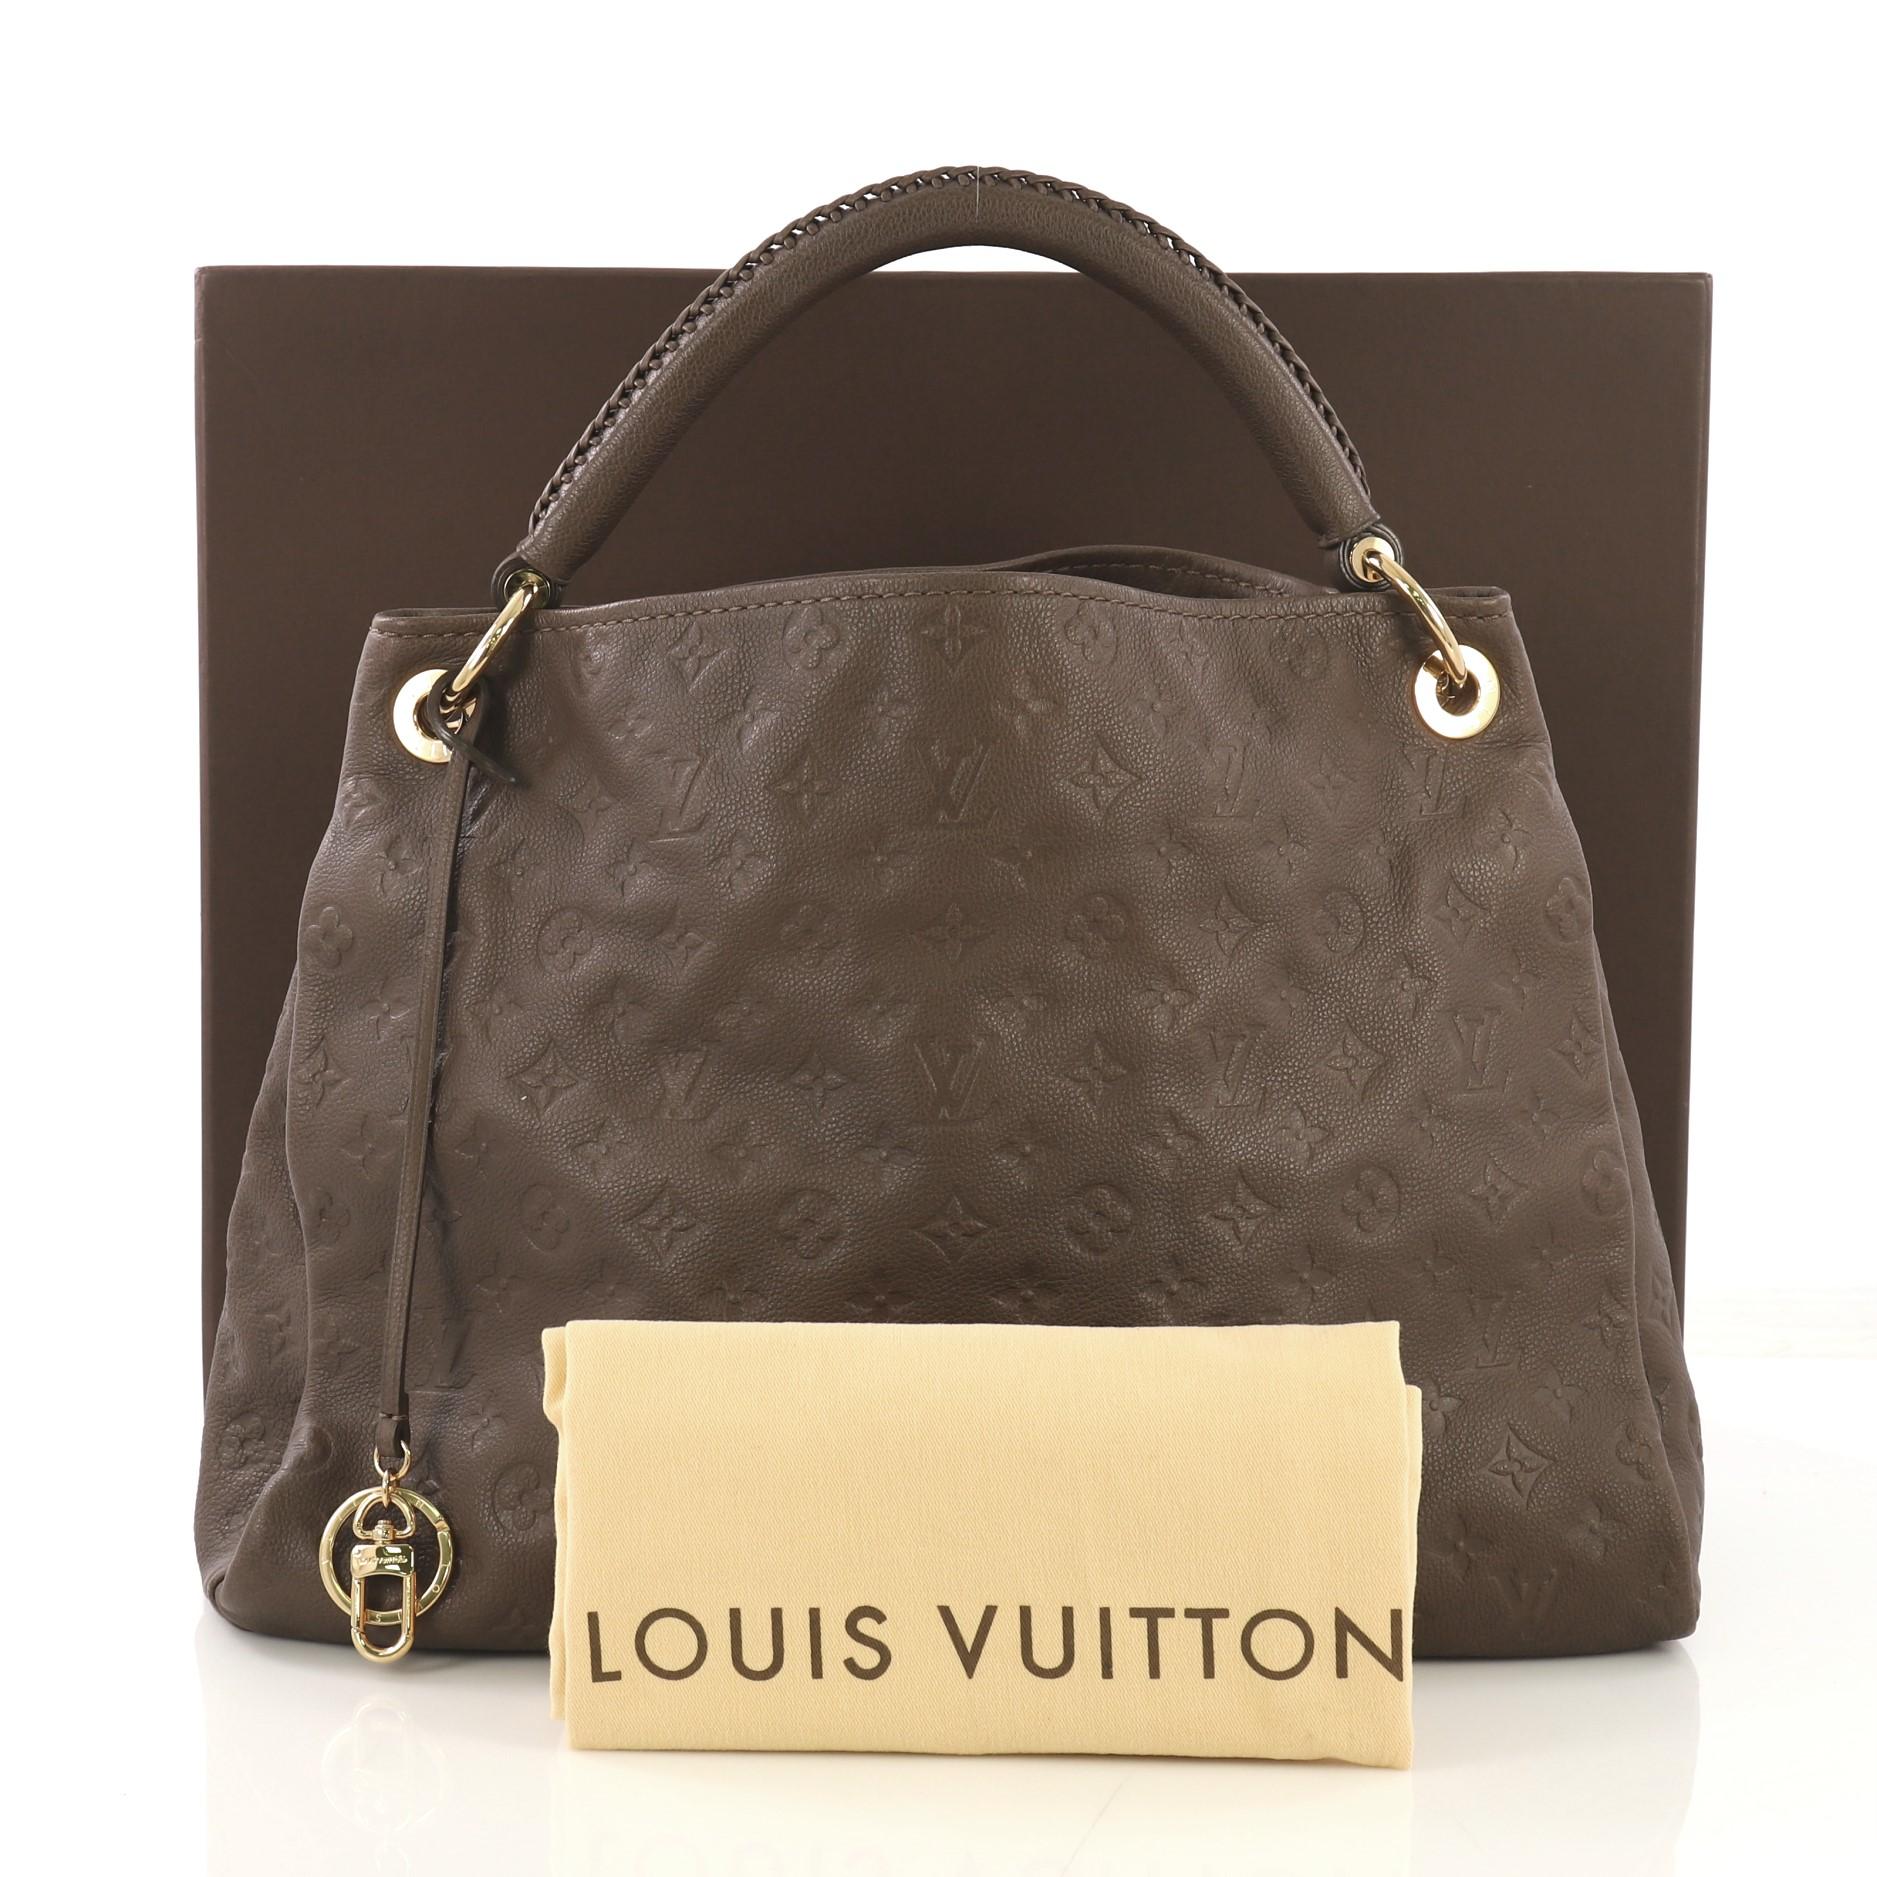 This Louis Vuitton Artsy Handbag Monogram Empreinte Leather MM, crafted from brown monogram empreinte leather, features a single looped braided top handle, protective base studs, and gold-tone hardware. Its wide open top showcases a brown fabric